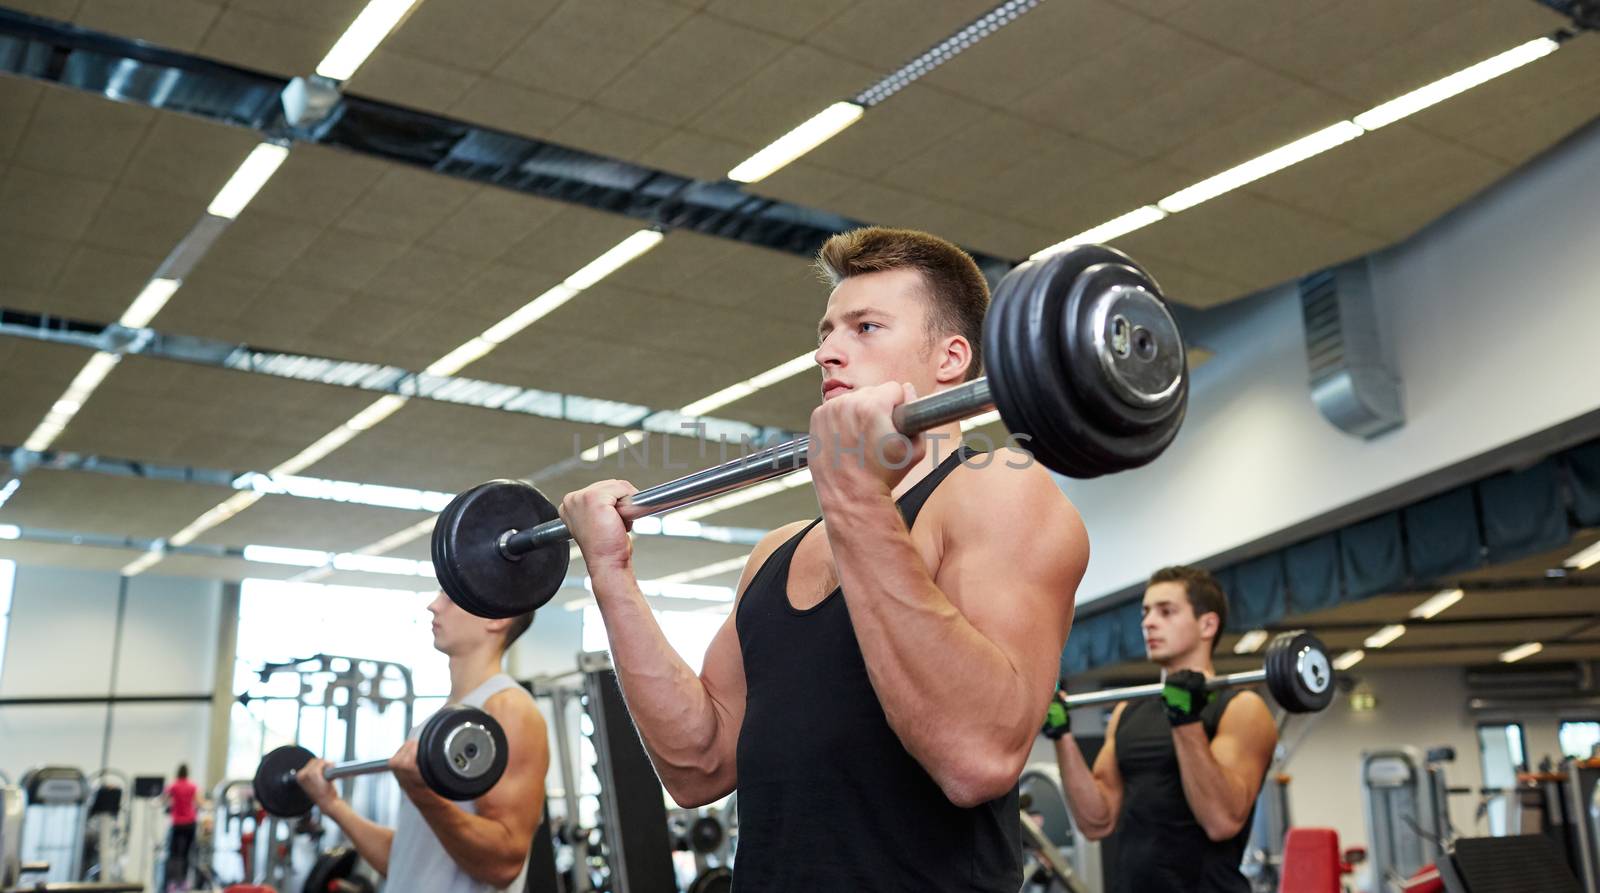 group of men flexing muscles with barbell in gym by dolgachov